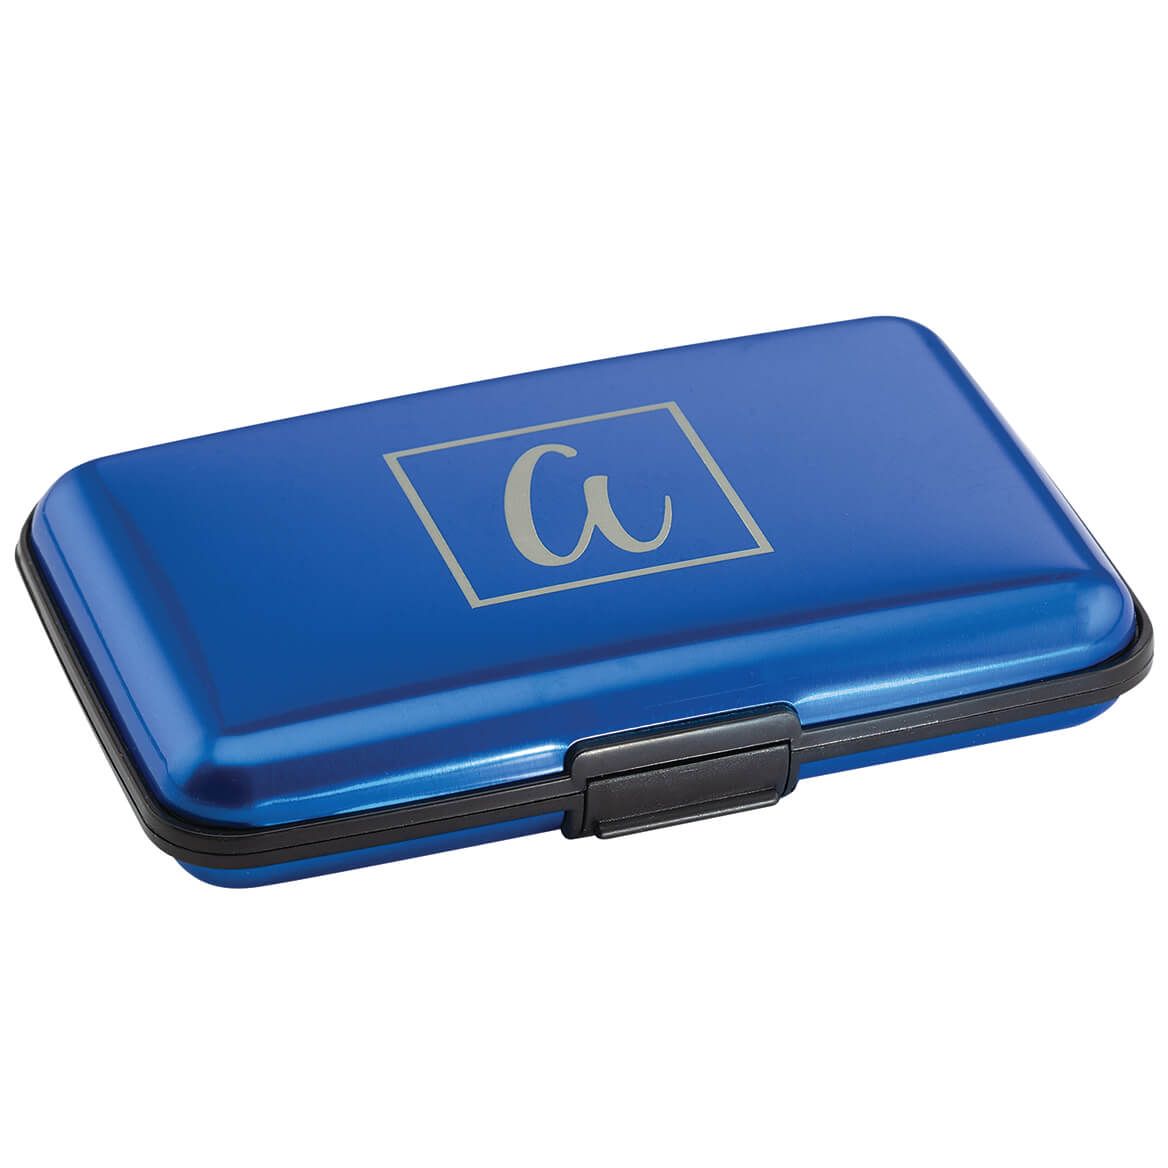 Personalized Initial Aluminum Credit Card Holder + '-' + 375568